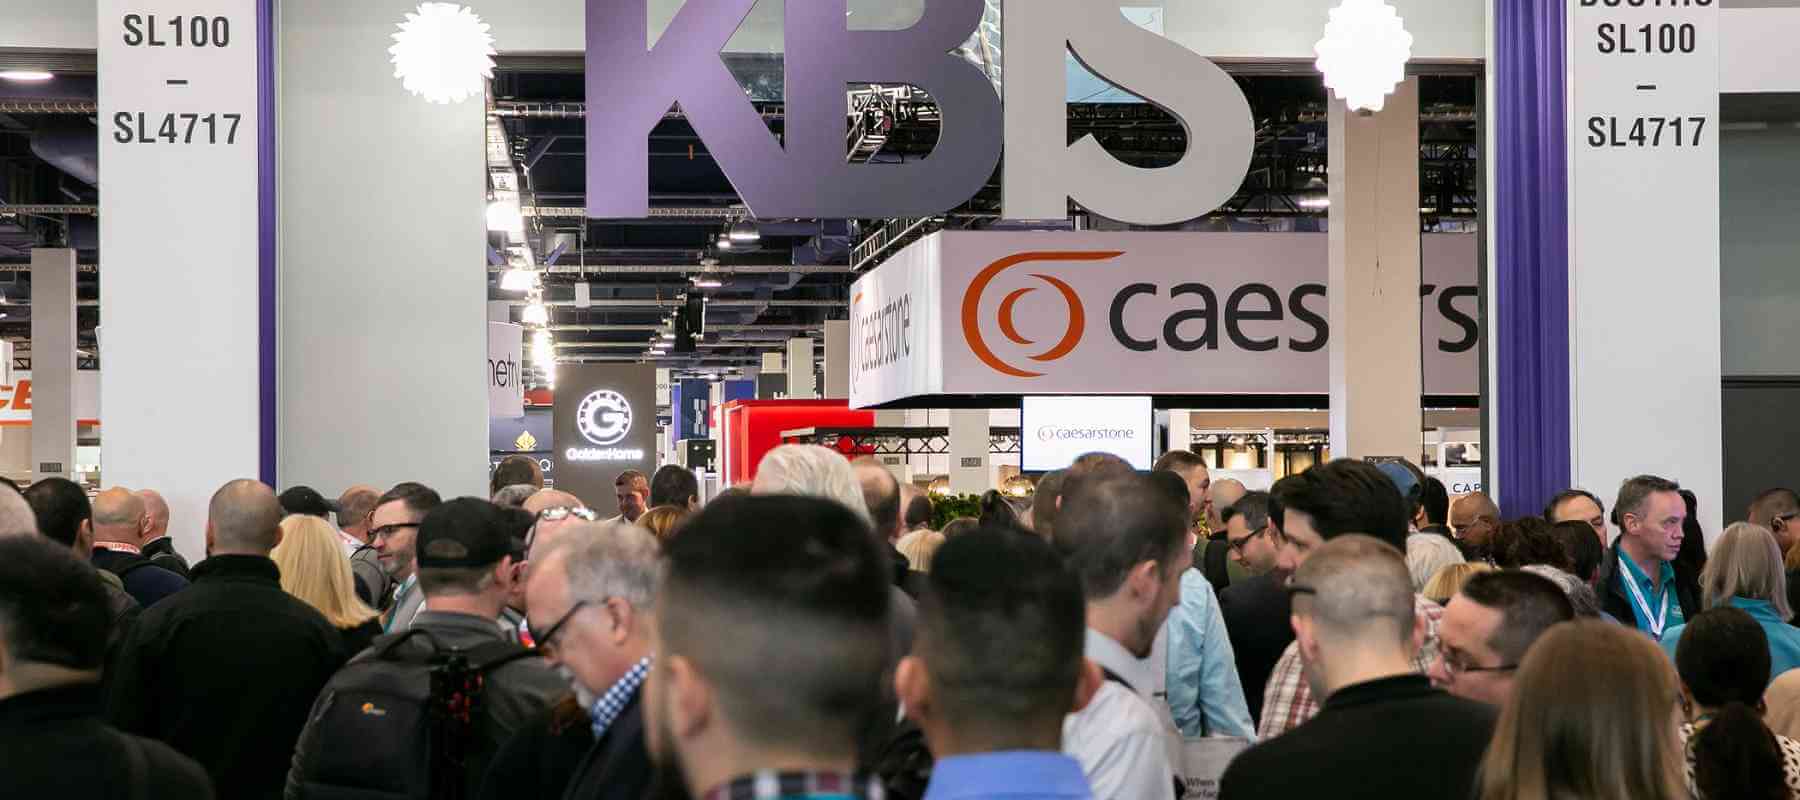 Closets shine at 2020 Builders Show/KBIS